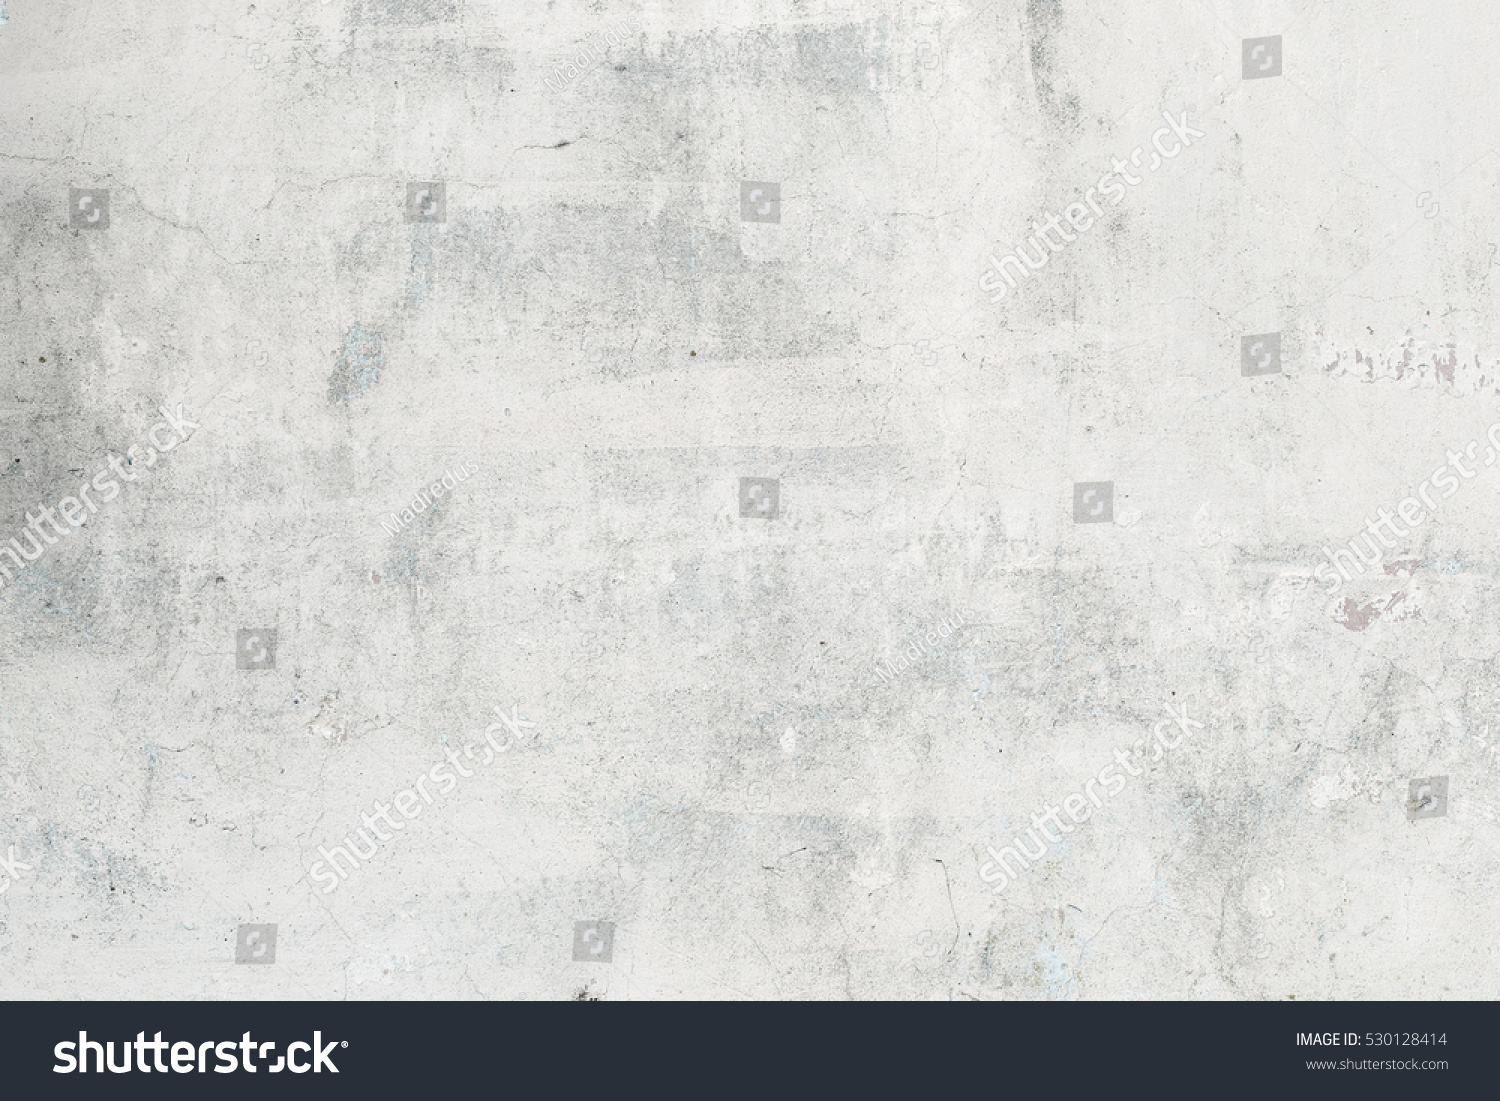 Old grunge textures backgrounds. Perfect background with space. #530128414